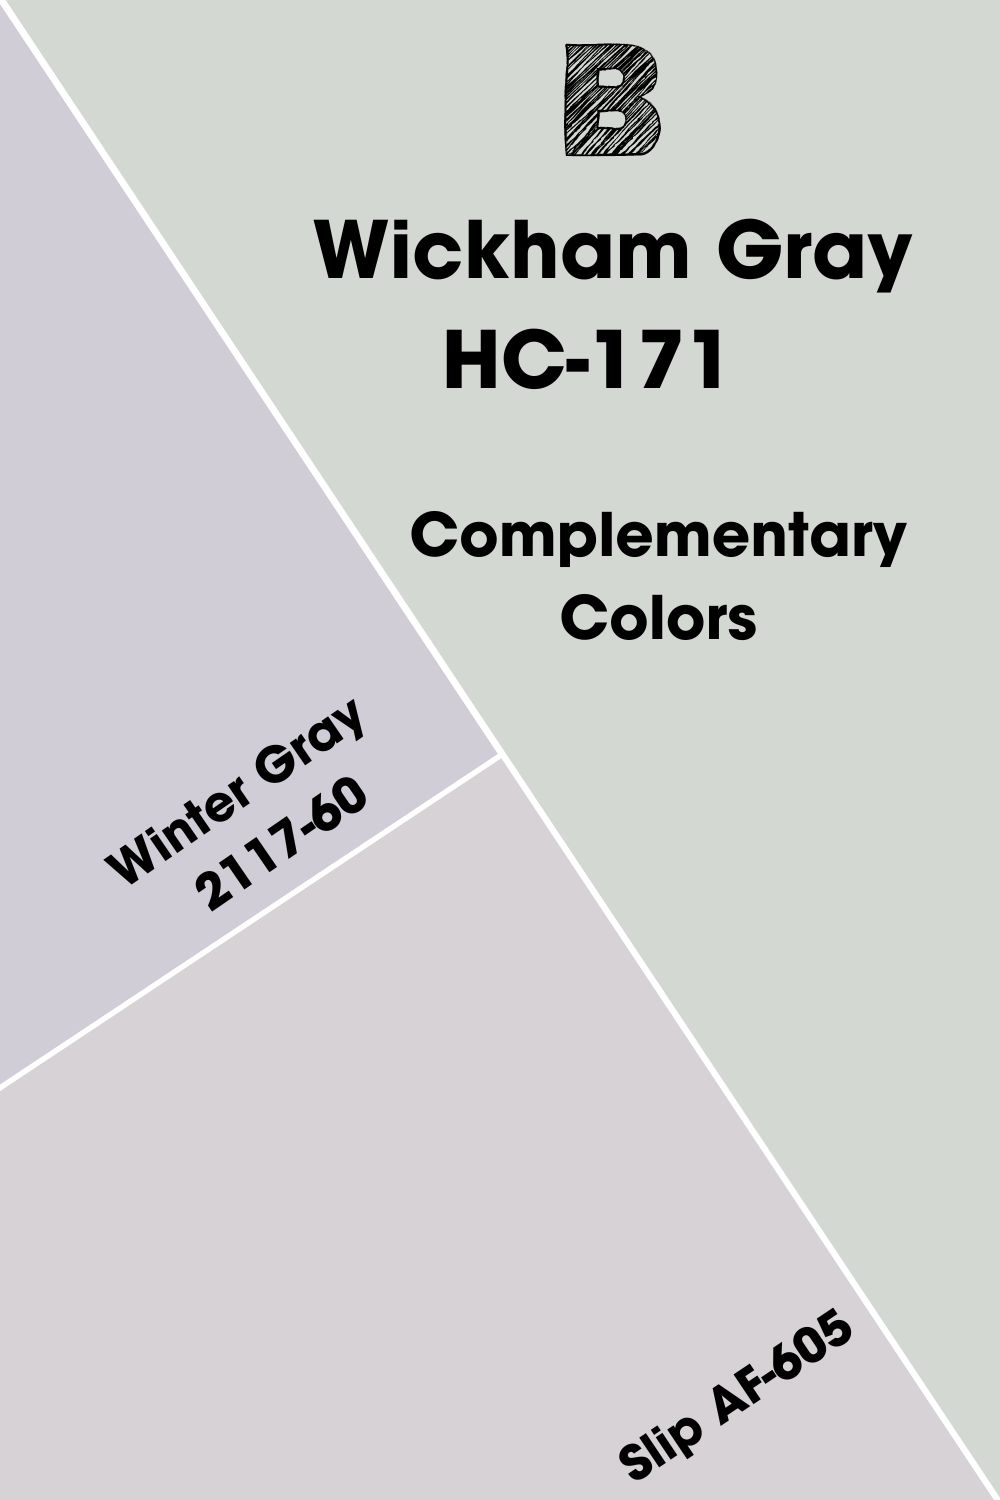 Complementary Colors for Wickham Gray